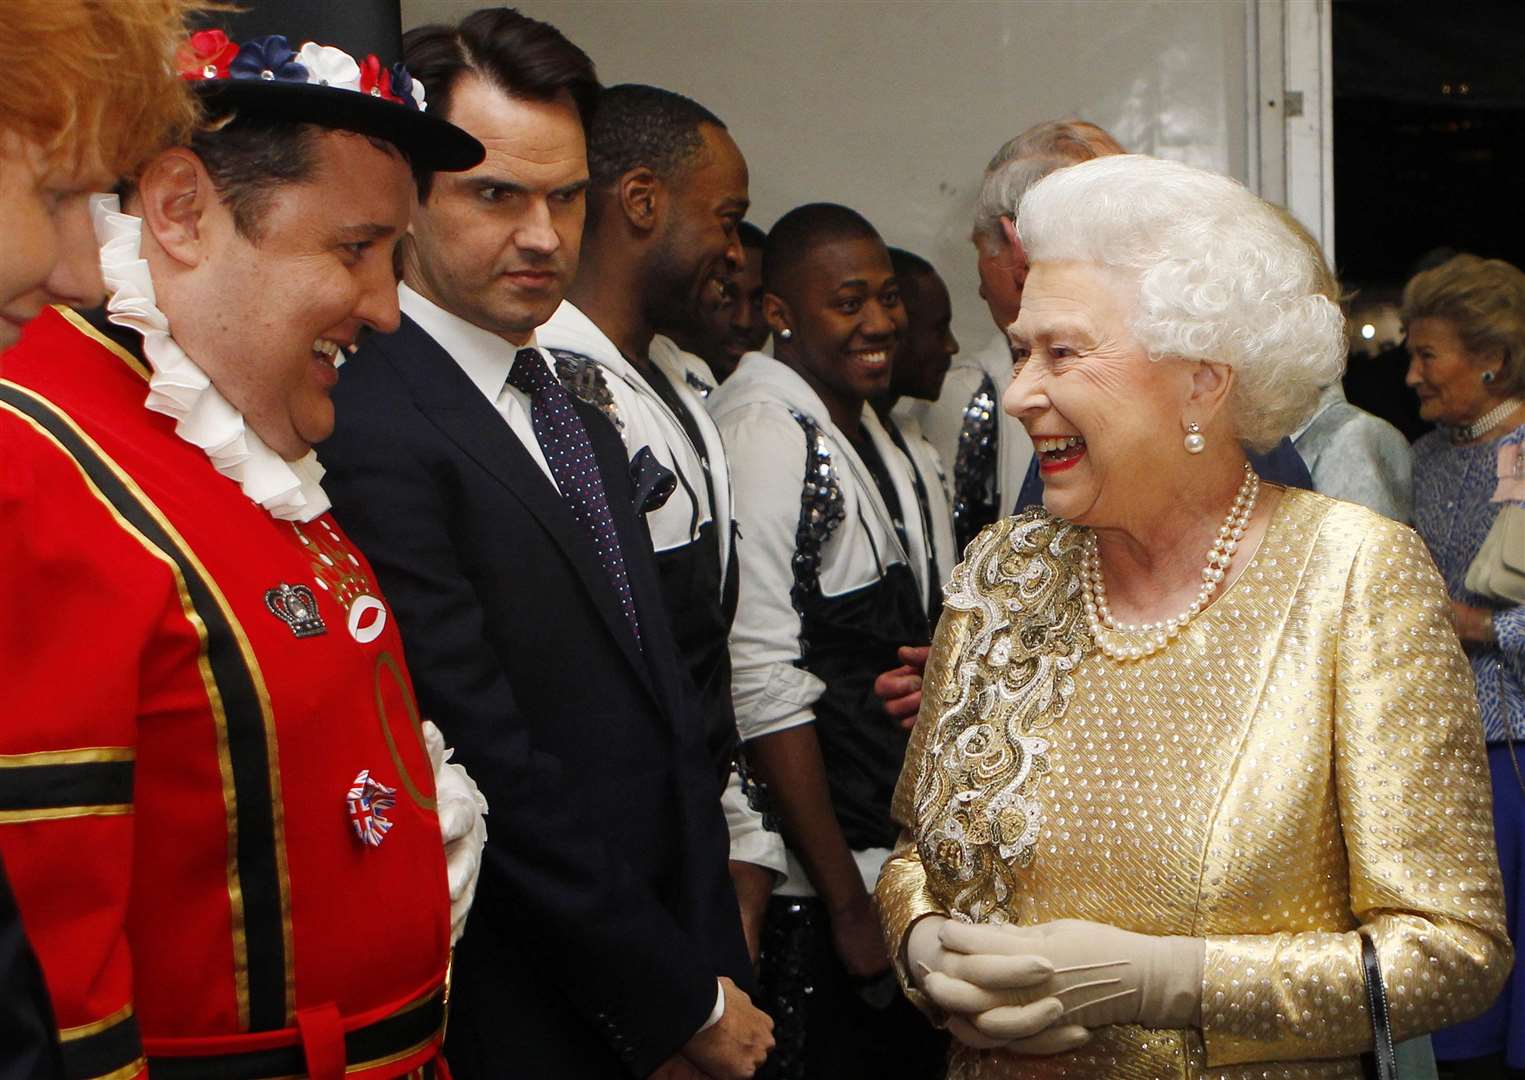 The Queen during the Diamond Jubilee celebrations in 2012 (Dave Thompson/PA)